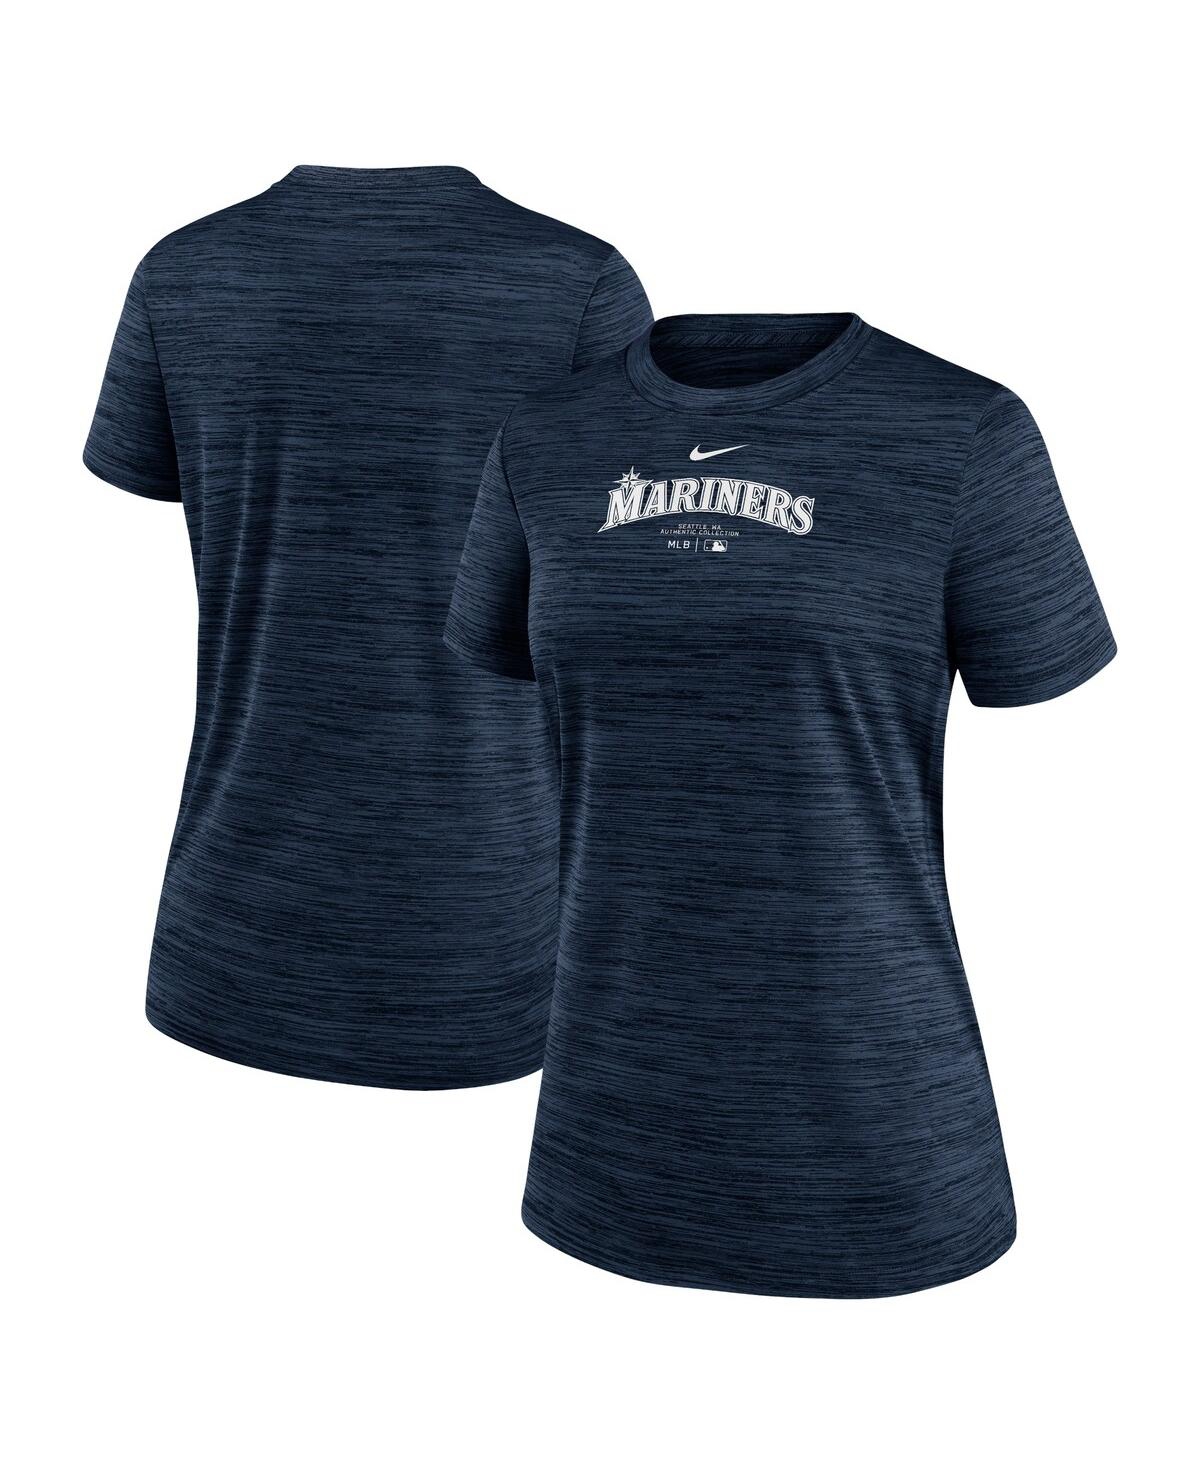 Women's Nike Navy Seattle Mariners Authentic Collection Velocity Performance T-shirt - Navy